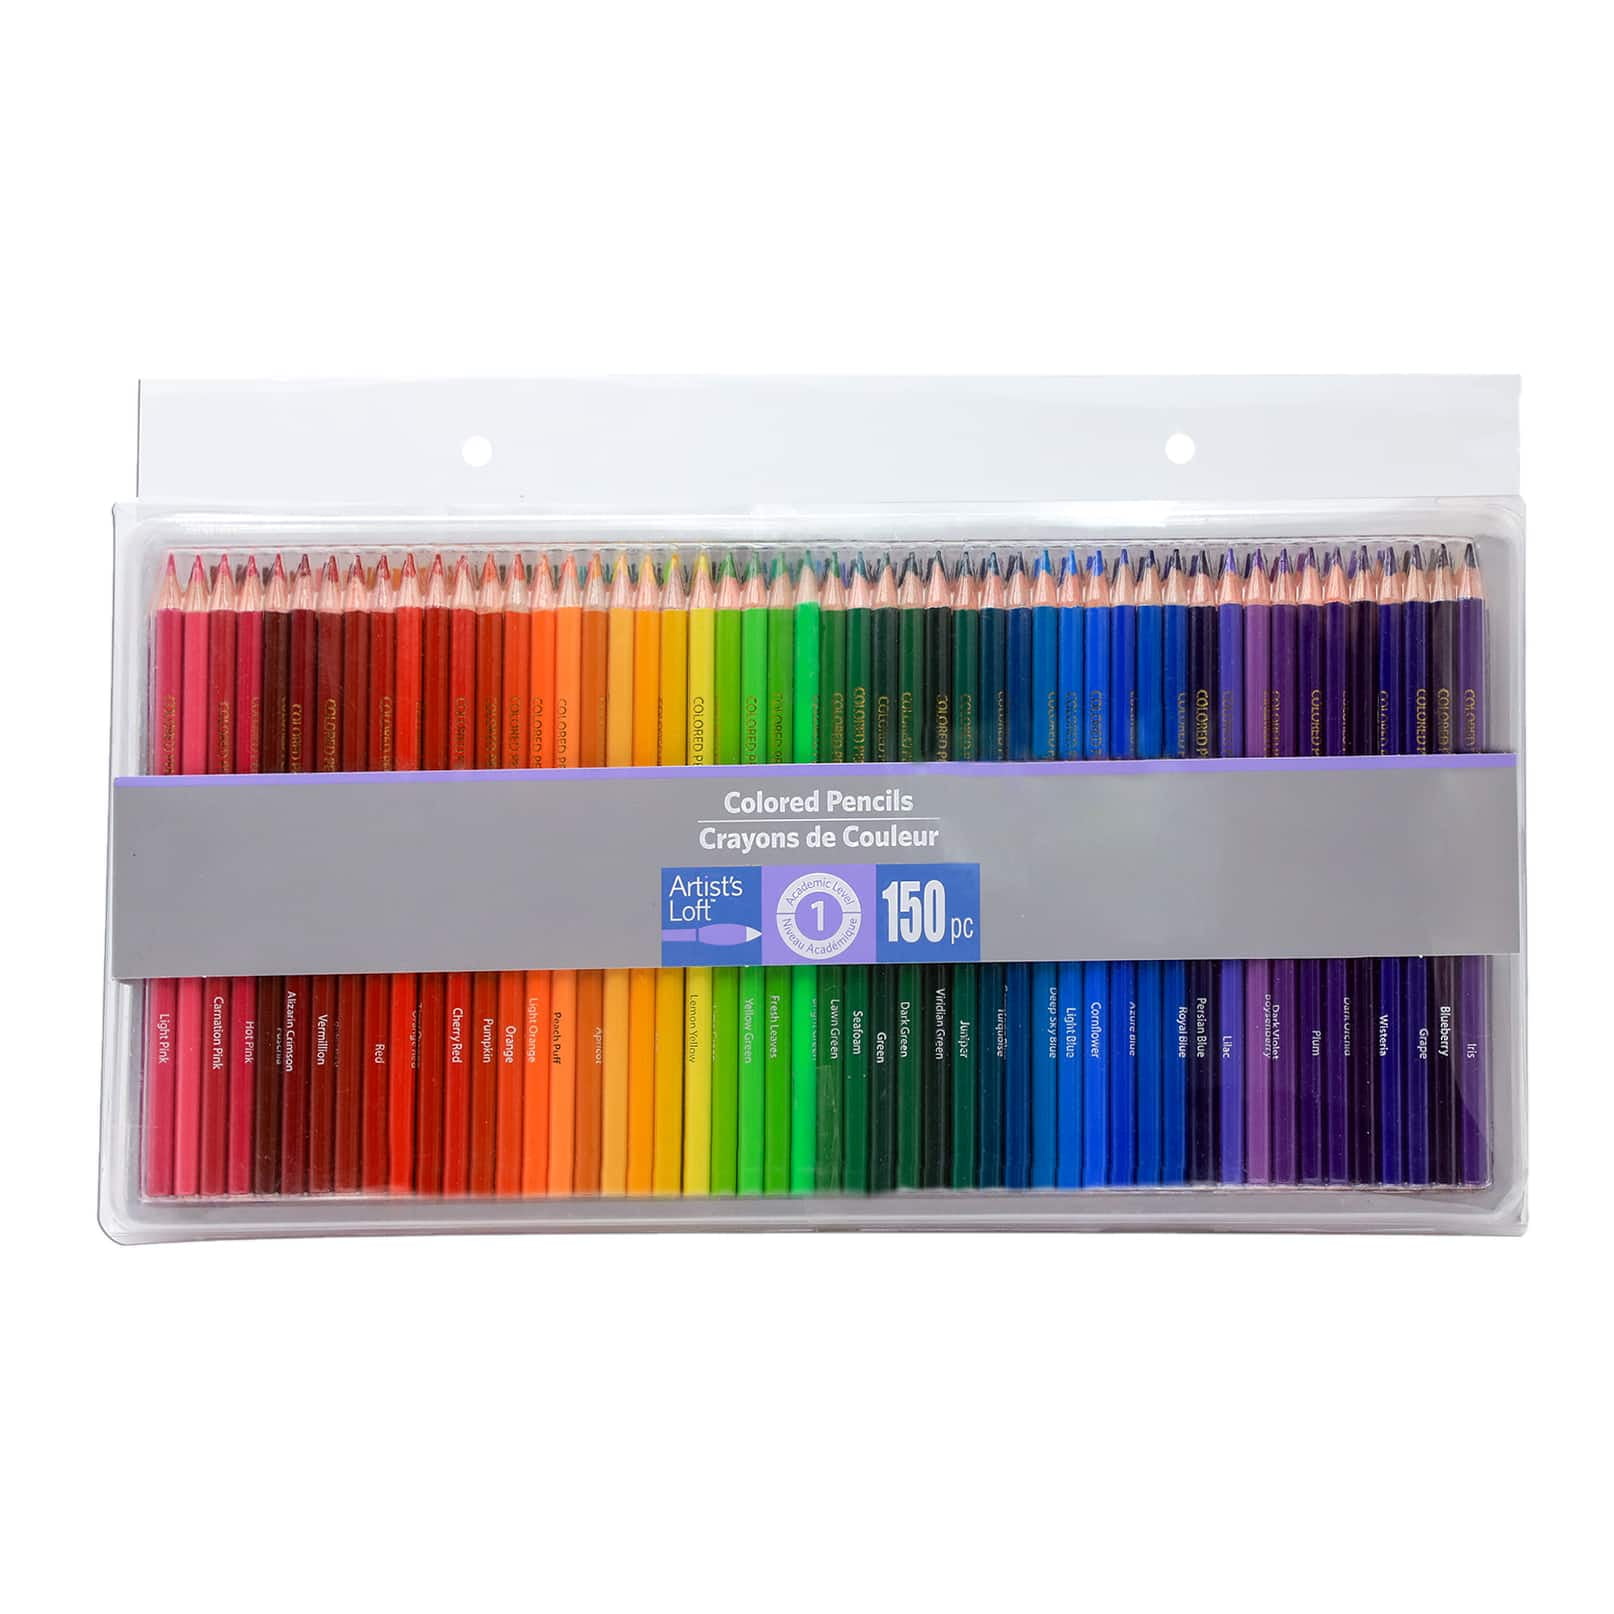 Promotional Adult Coloring Book & 6-Color Pencil Set To-Go